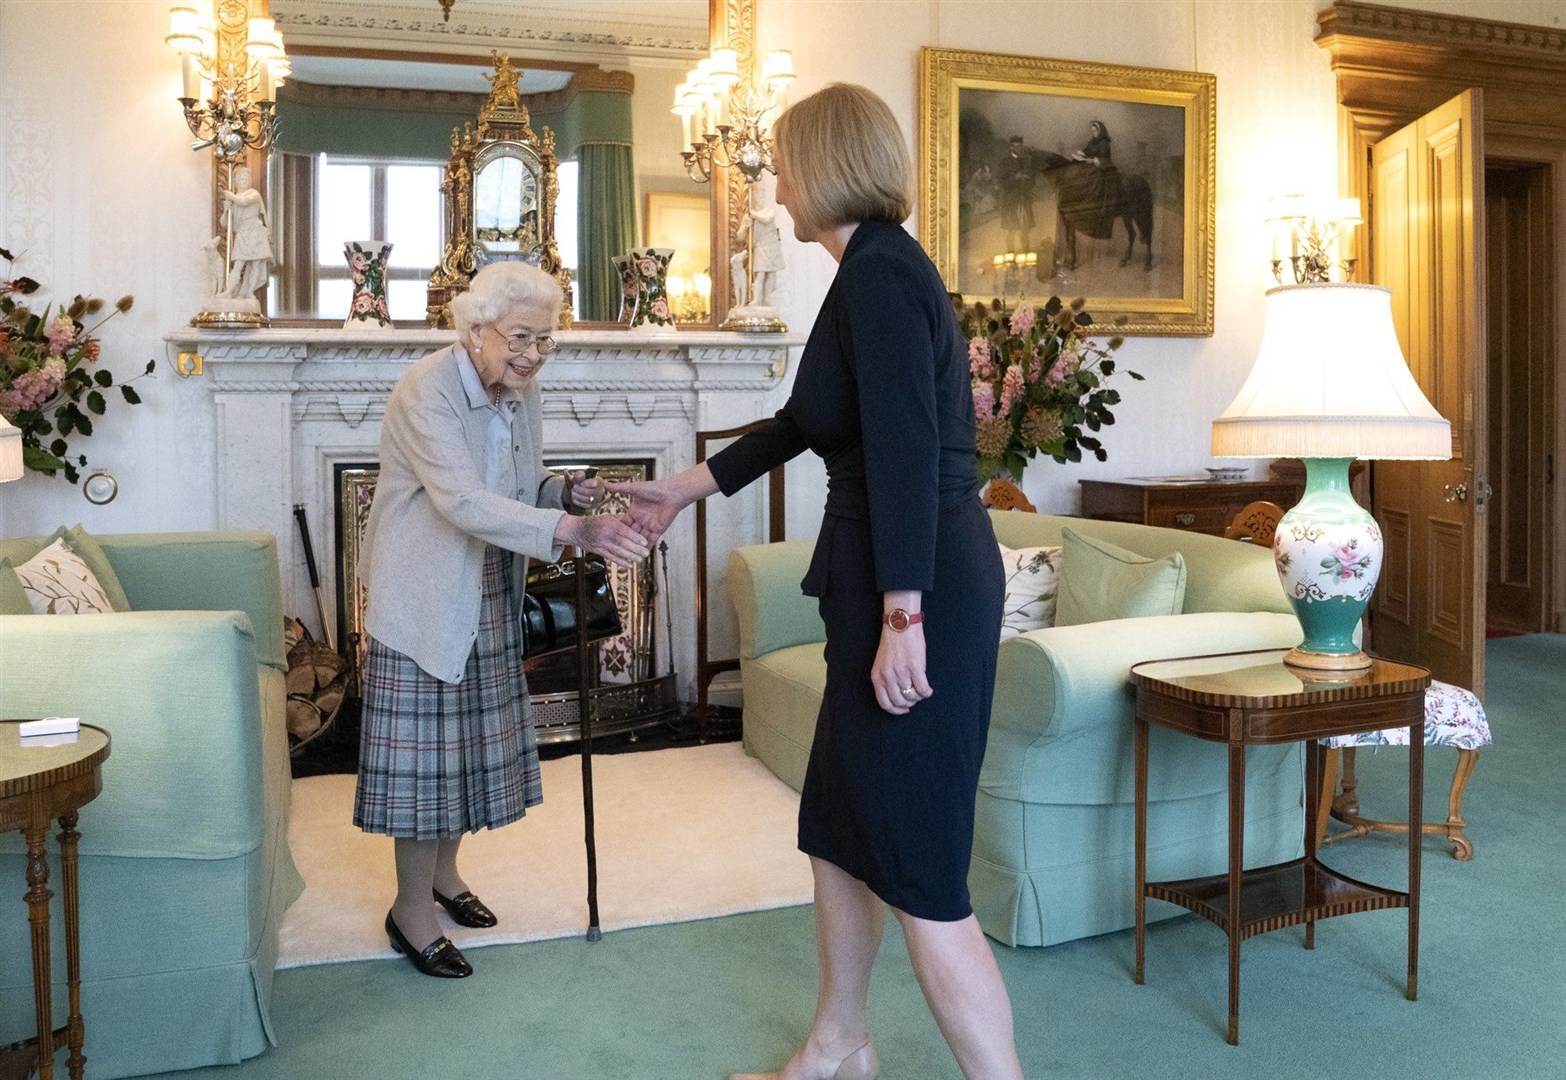 The Queen meeting Liz Truss to invite her to become Prime Minister.